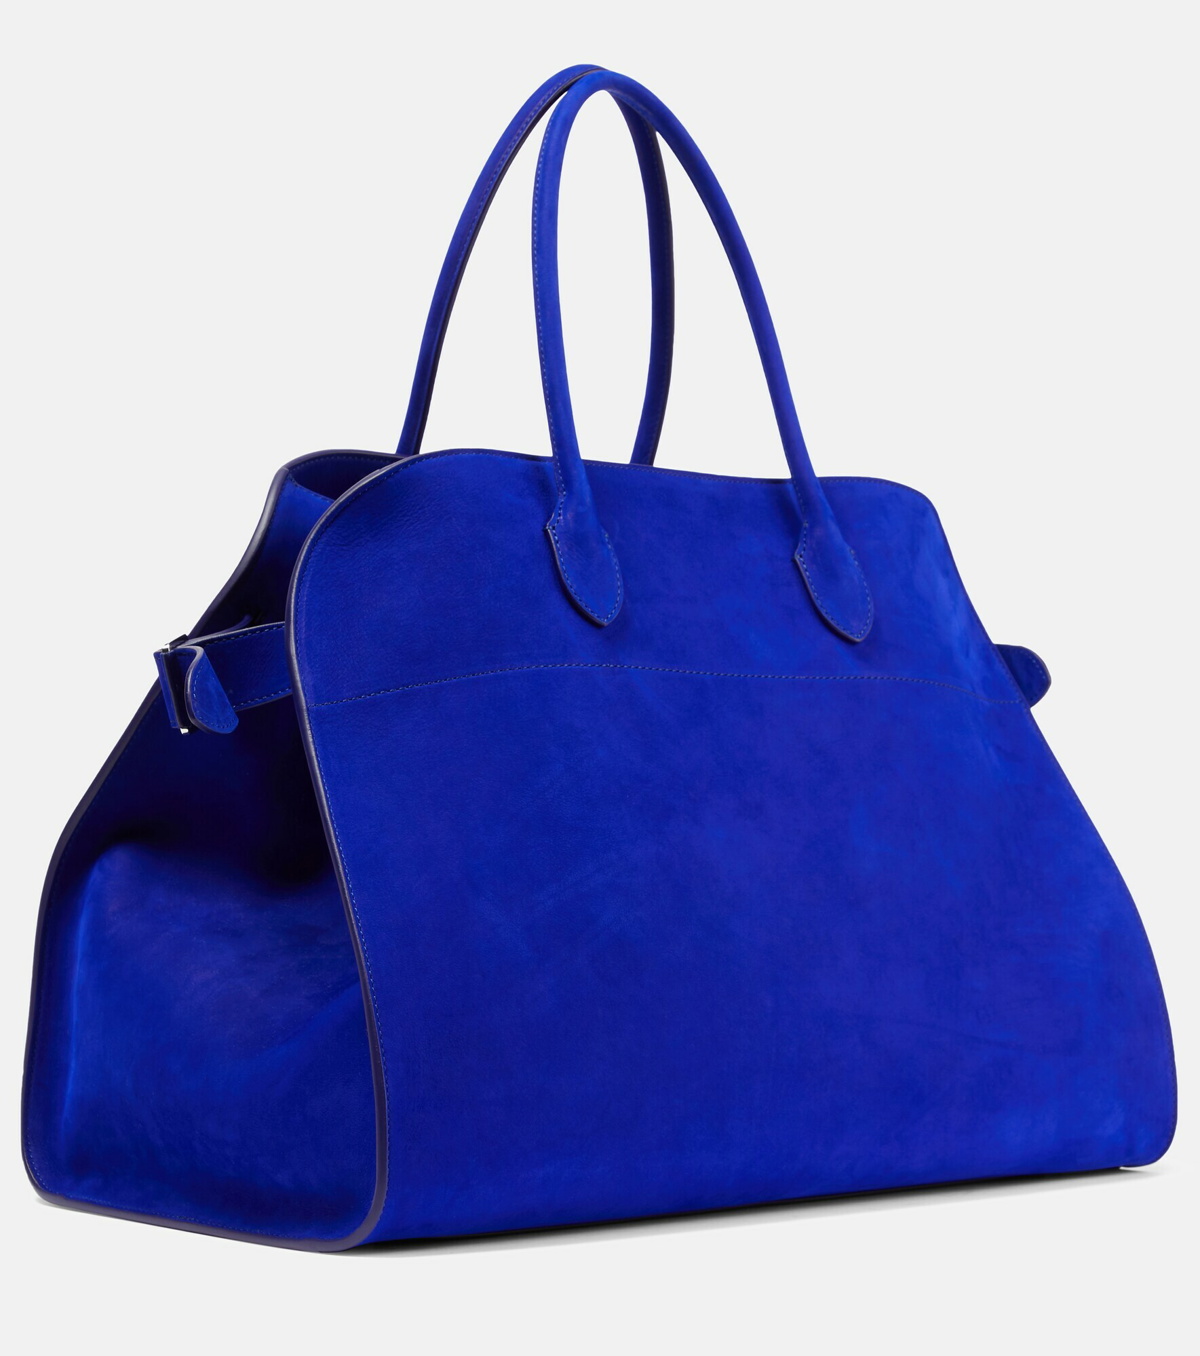 The Row Margaux 17 Top-Handle Bag